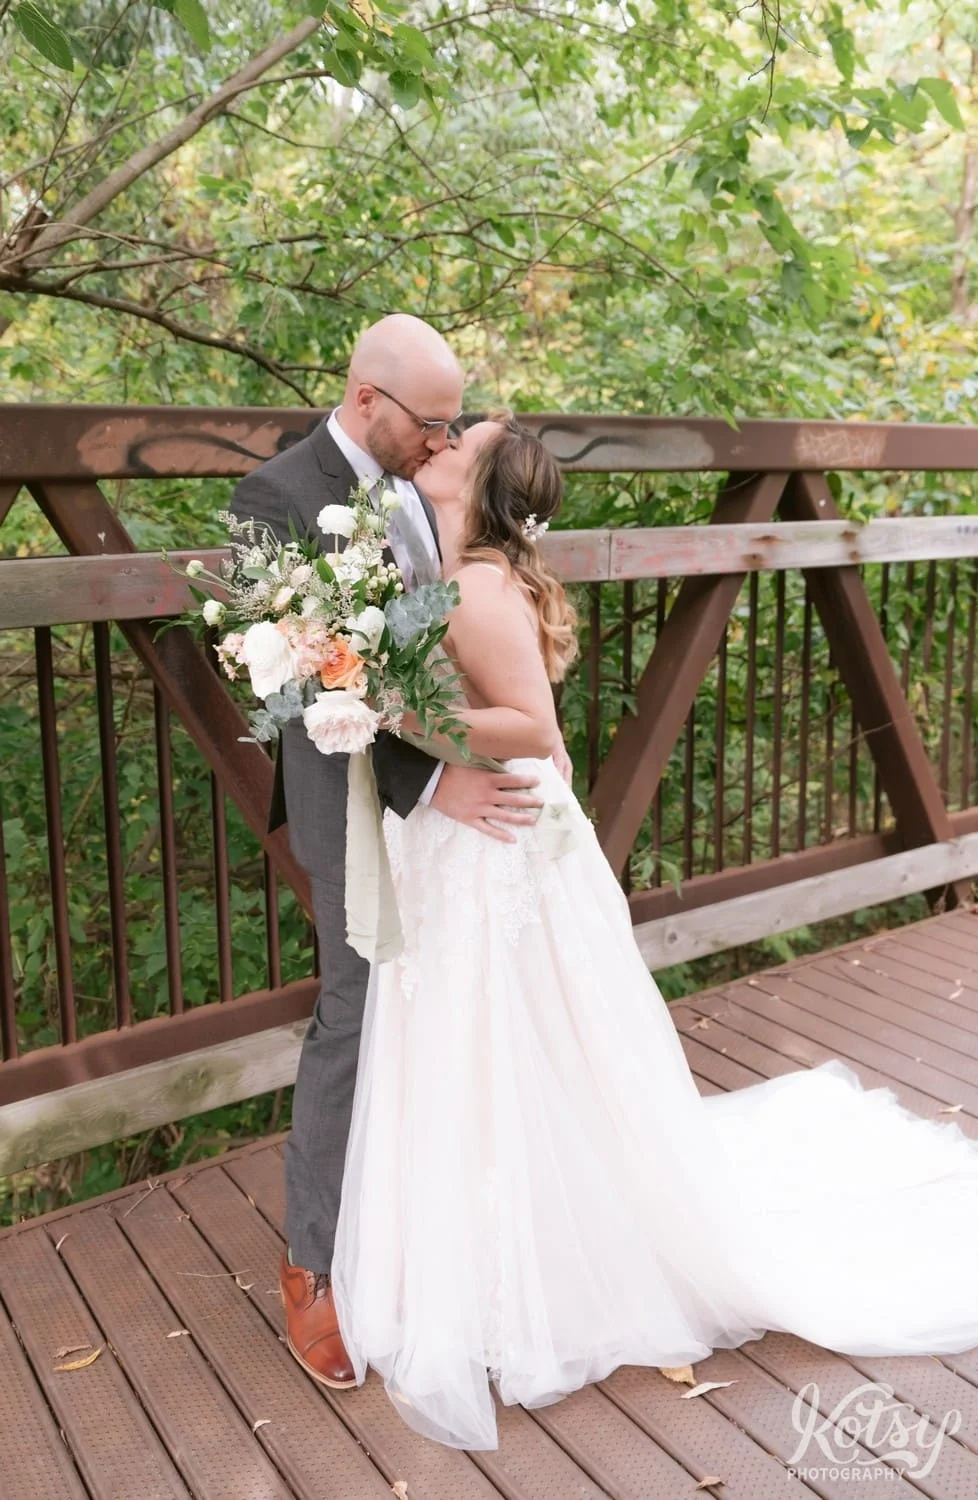 A bride wearing a white bridal gown and a groom wearing a gray suit kiss on a bridge during their first look at West Deane Park in Toronto, Canada